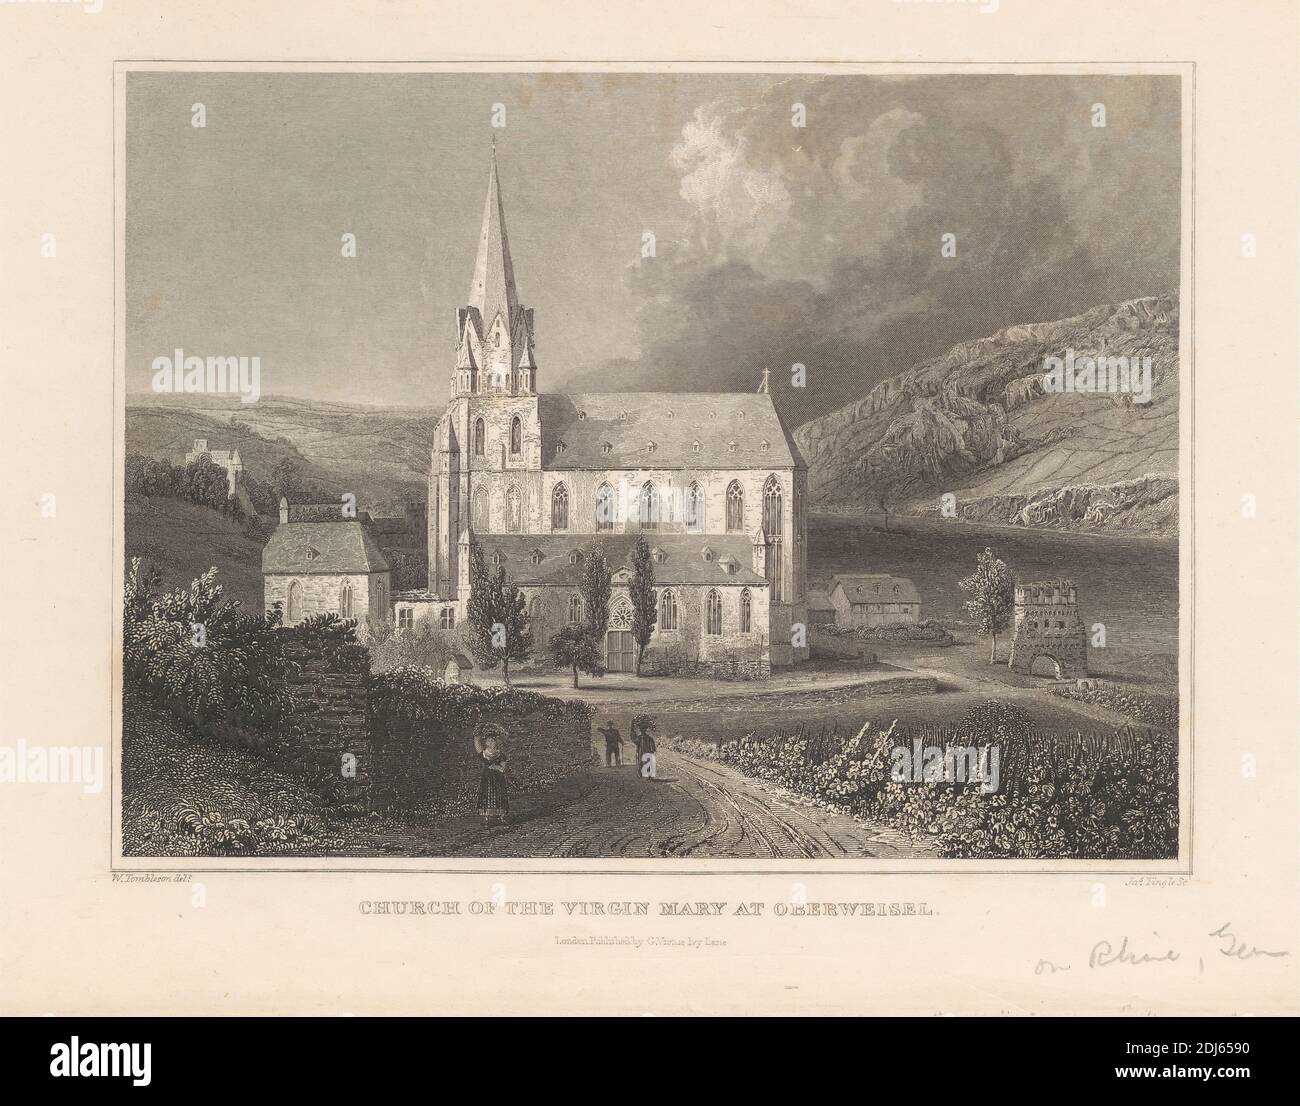 Church of the Virgin Mary at Oberweisel, Print made by James Tingle, active ca. 1830–1860, after William Tombleson, ca.1795–1835, British, undated, Line engraving on medium, slightly textured, cream wove paper Stock Photo